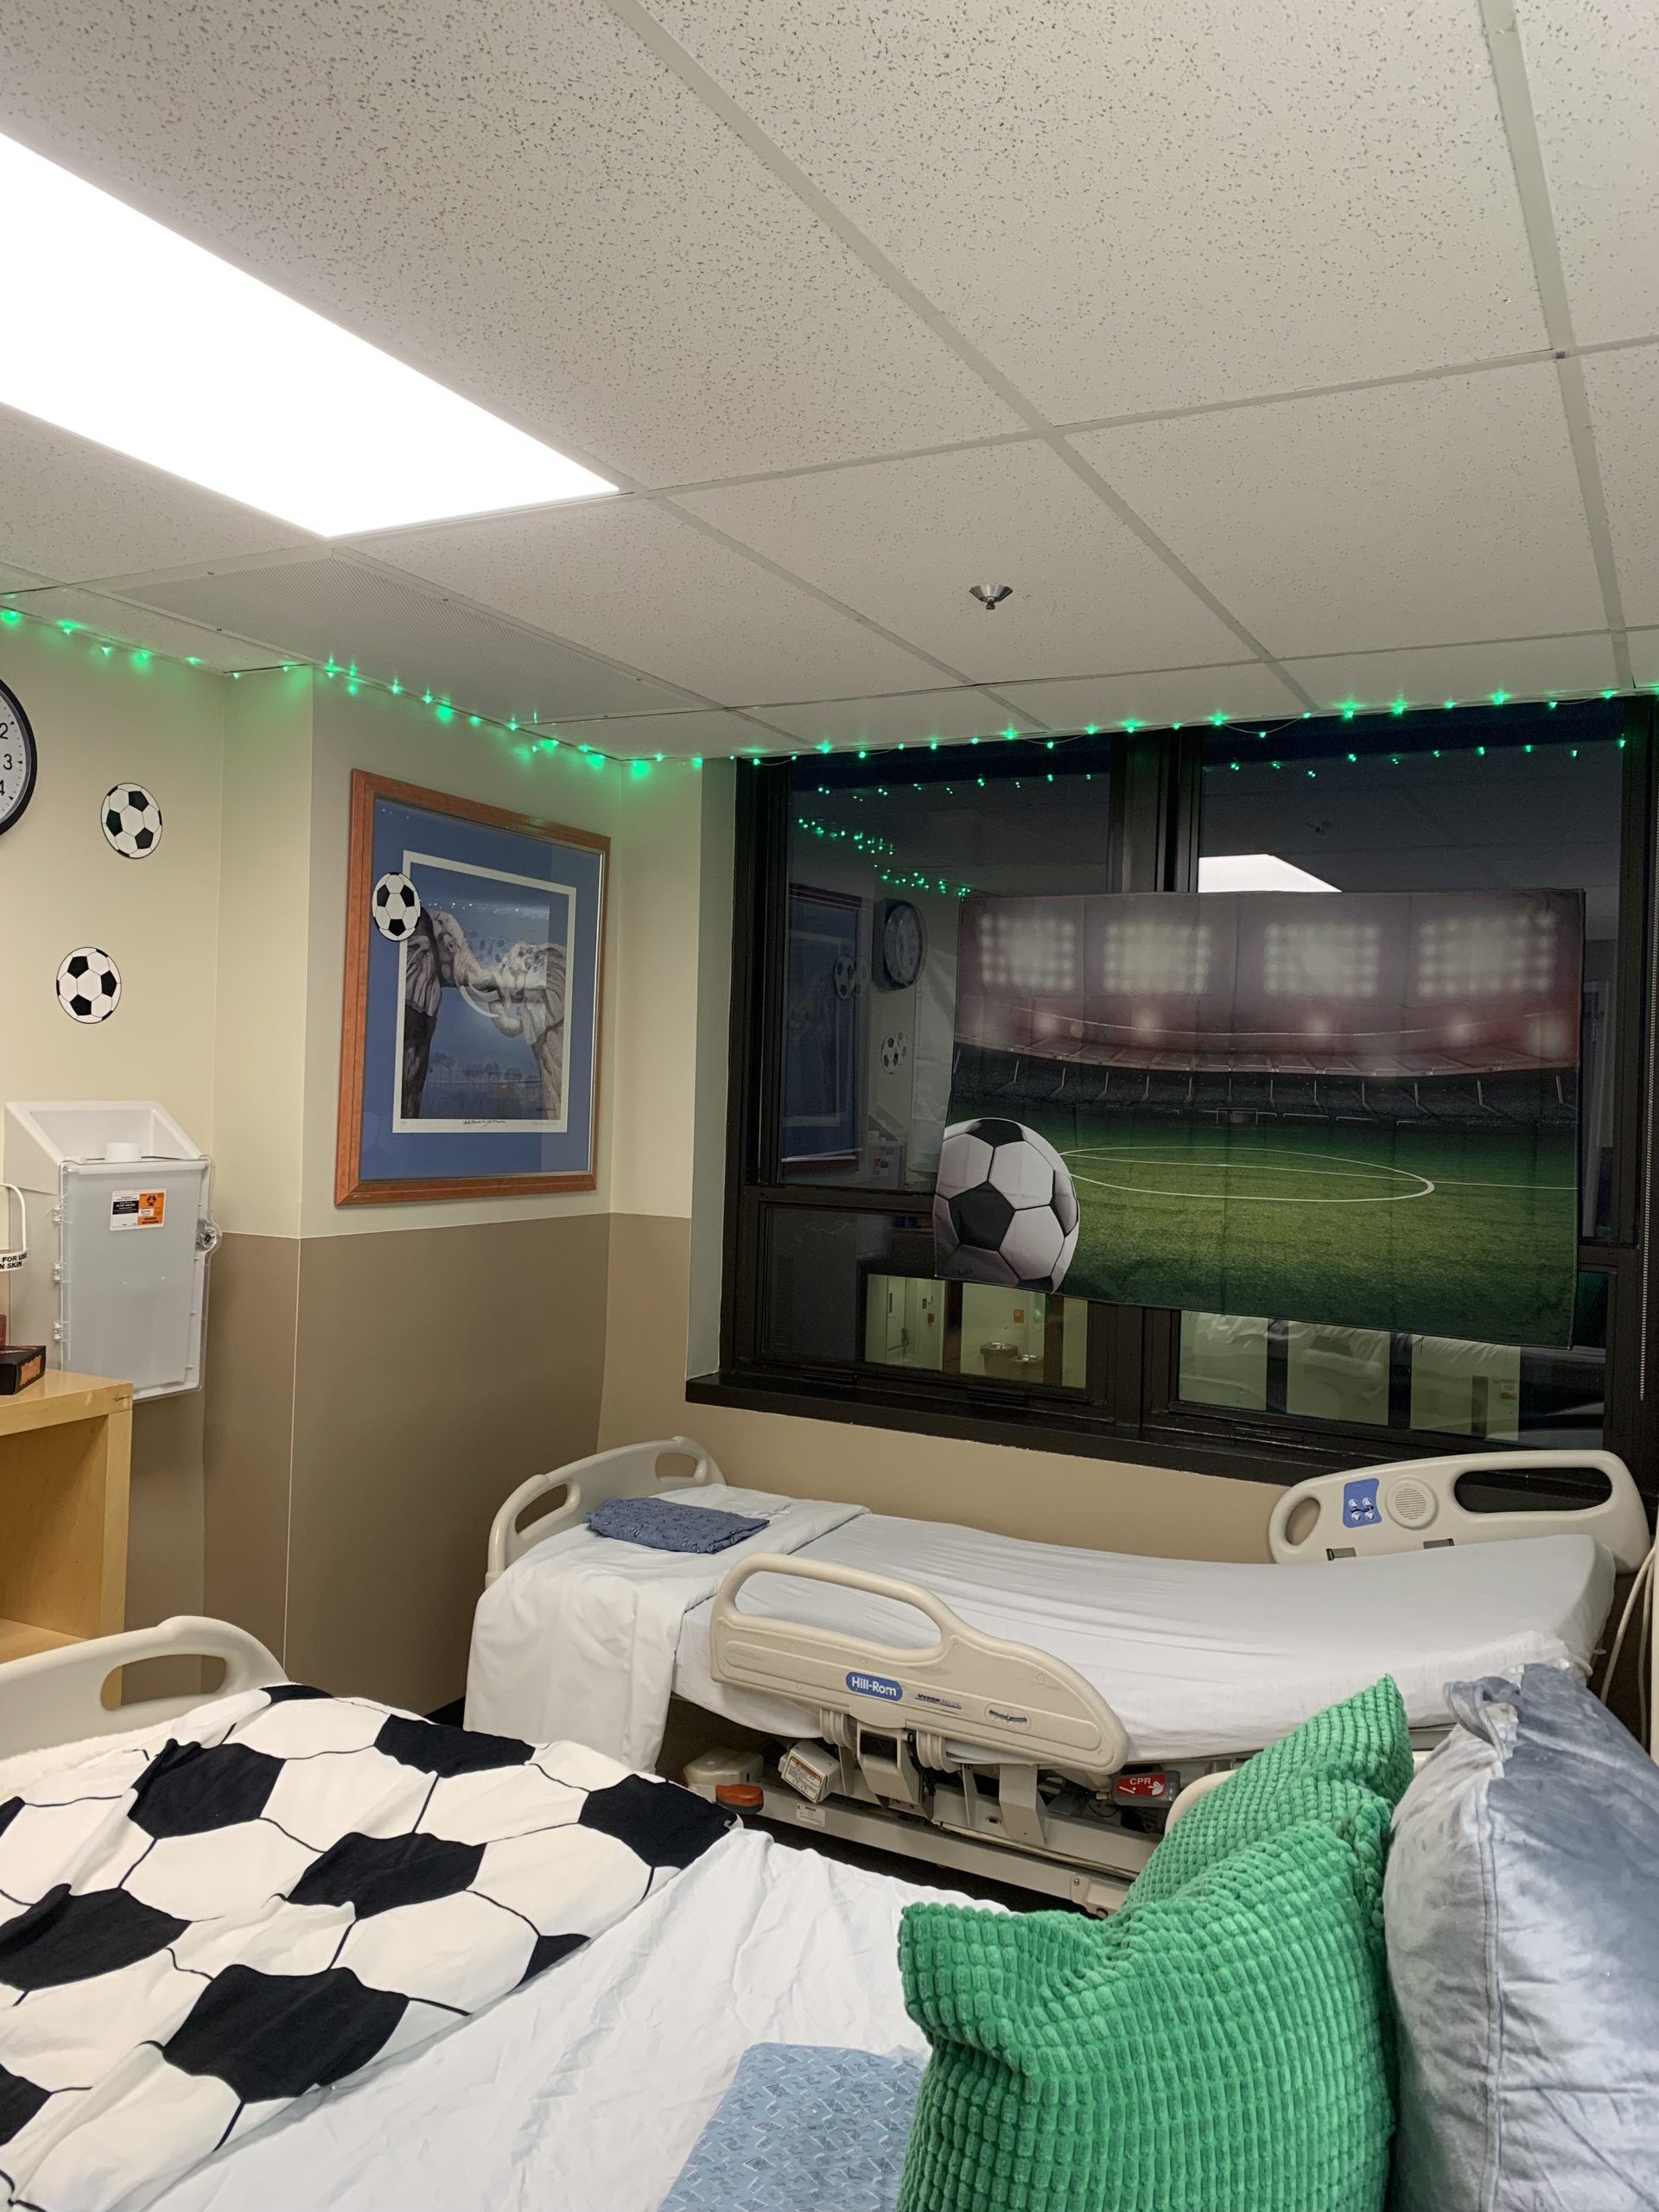 A hospital room with stickers of soccer balls and posters on the wall